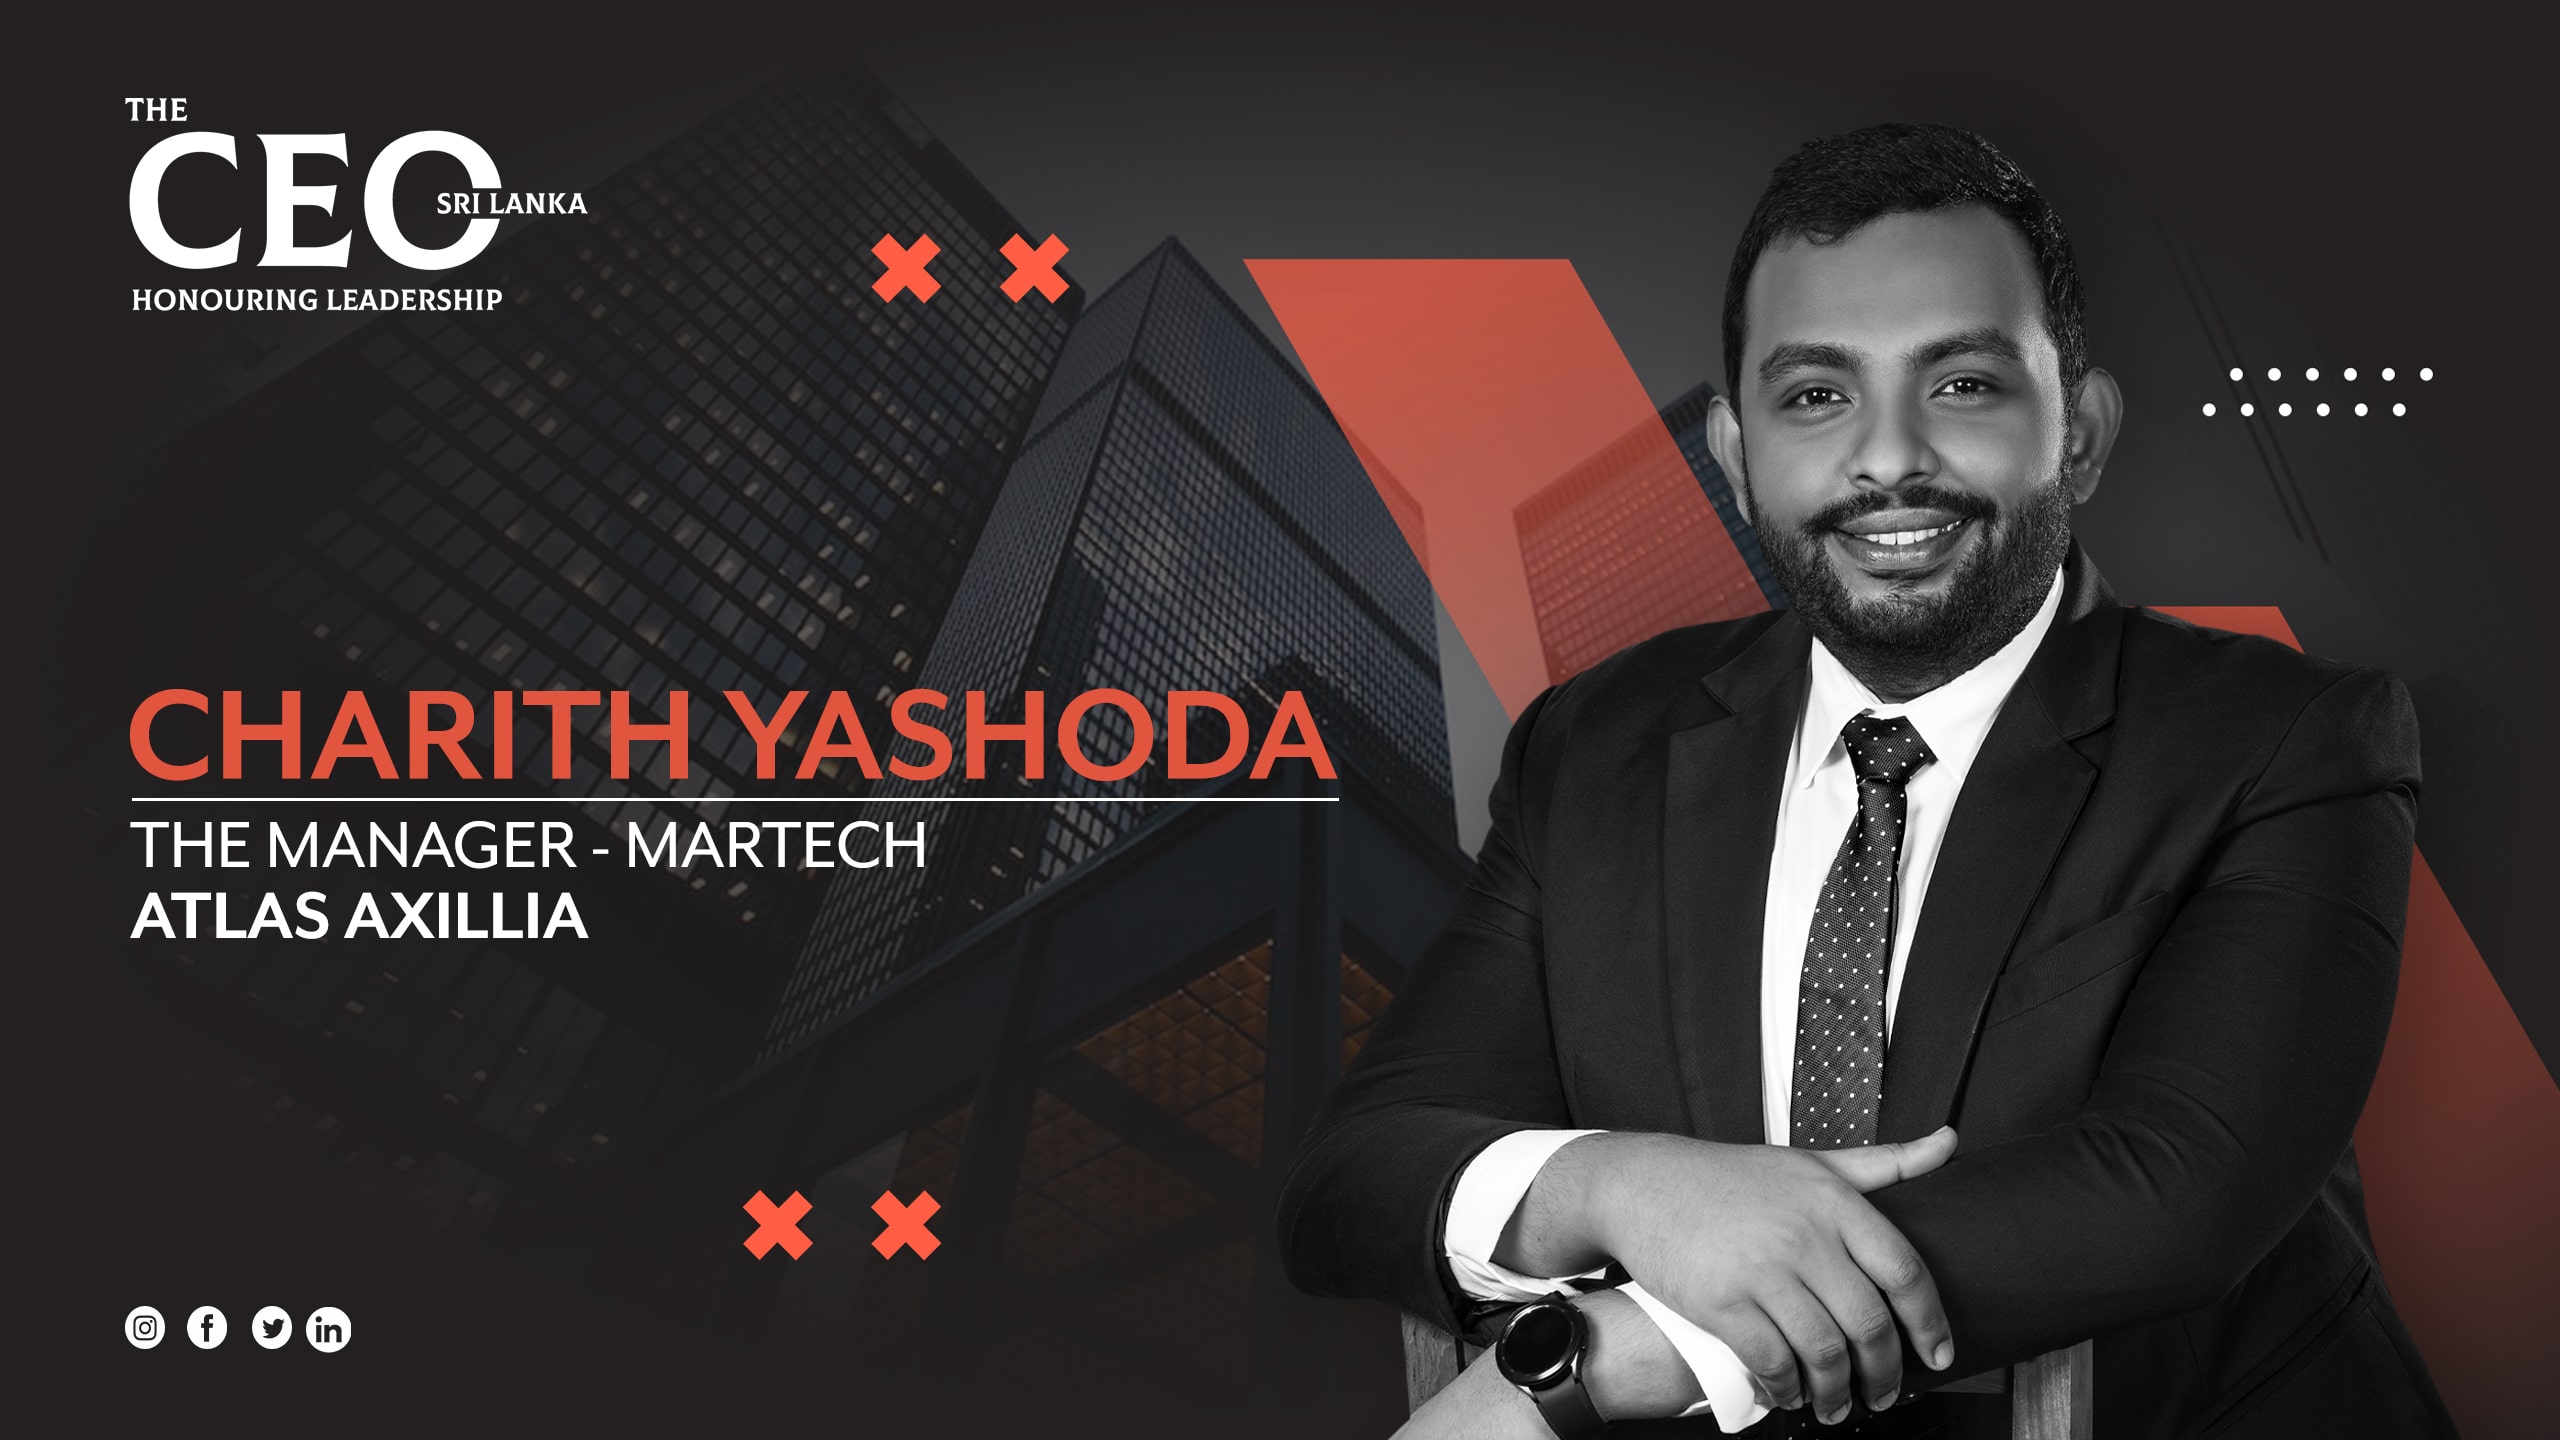 THE YOUNG TEAM OF LEADERS AT ATLAS AXILLIA TRANSFORMING THE LEARNING LANDSCAPE  OF SRI LANKA – THE MANAGER – MARTECH OF ATLAS AXILLIA, CHARITH YASHODA